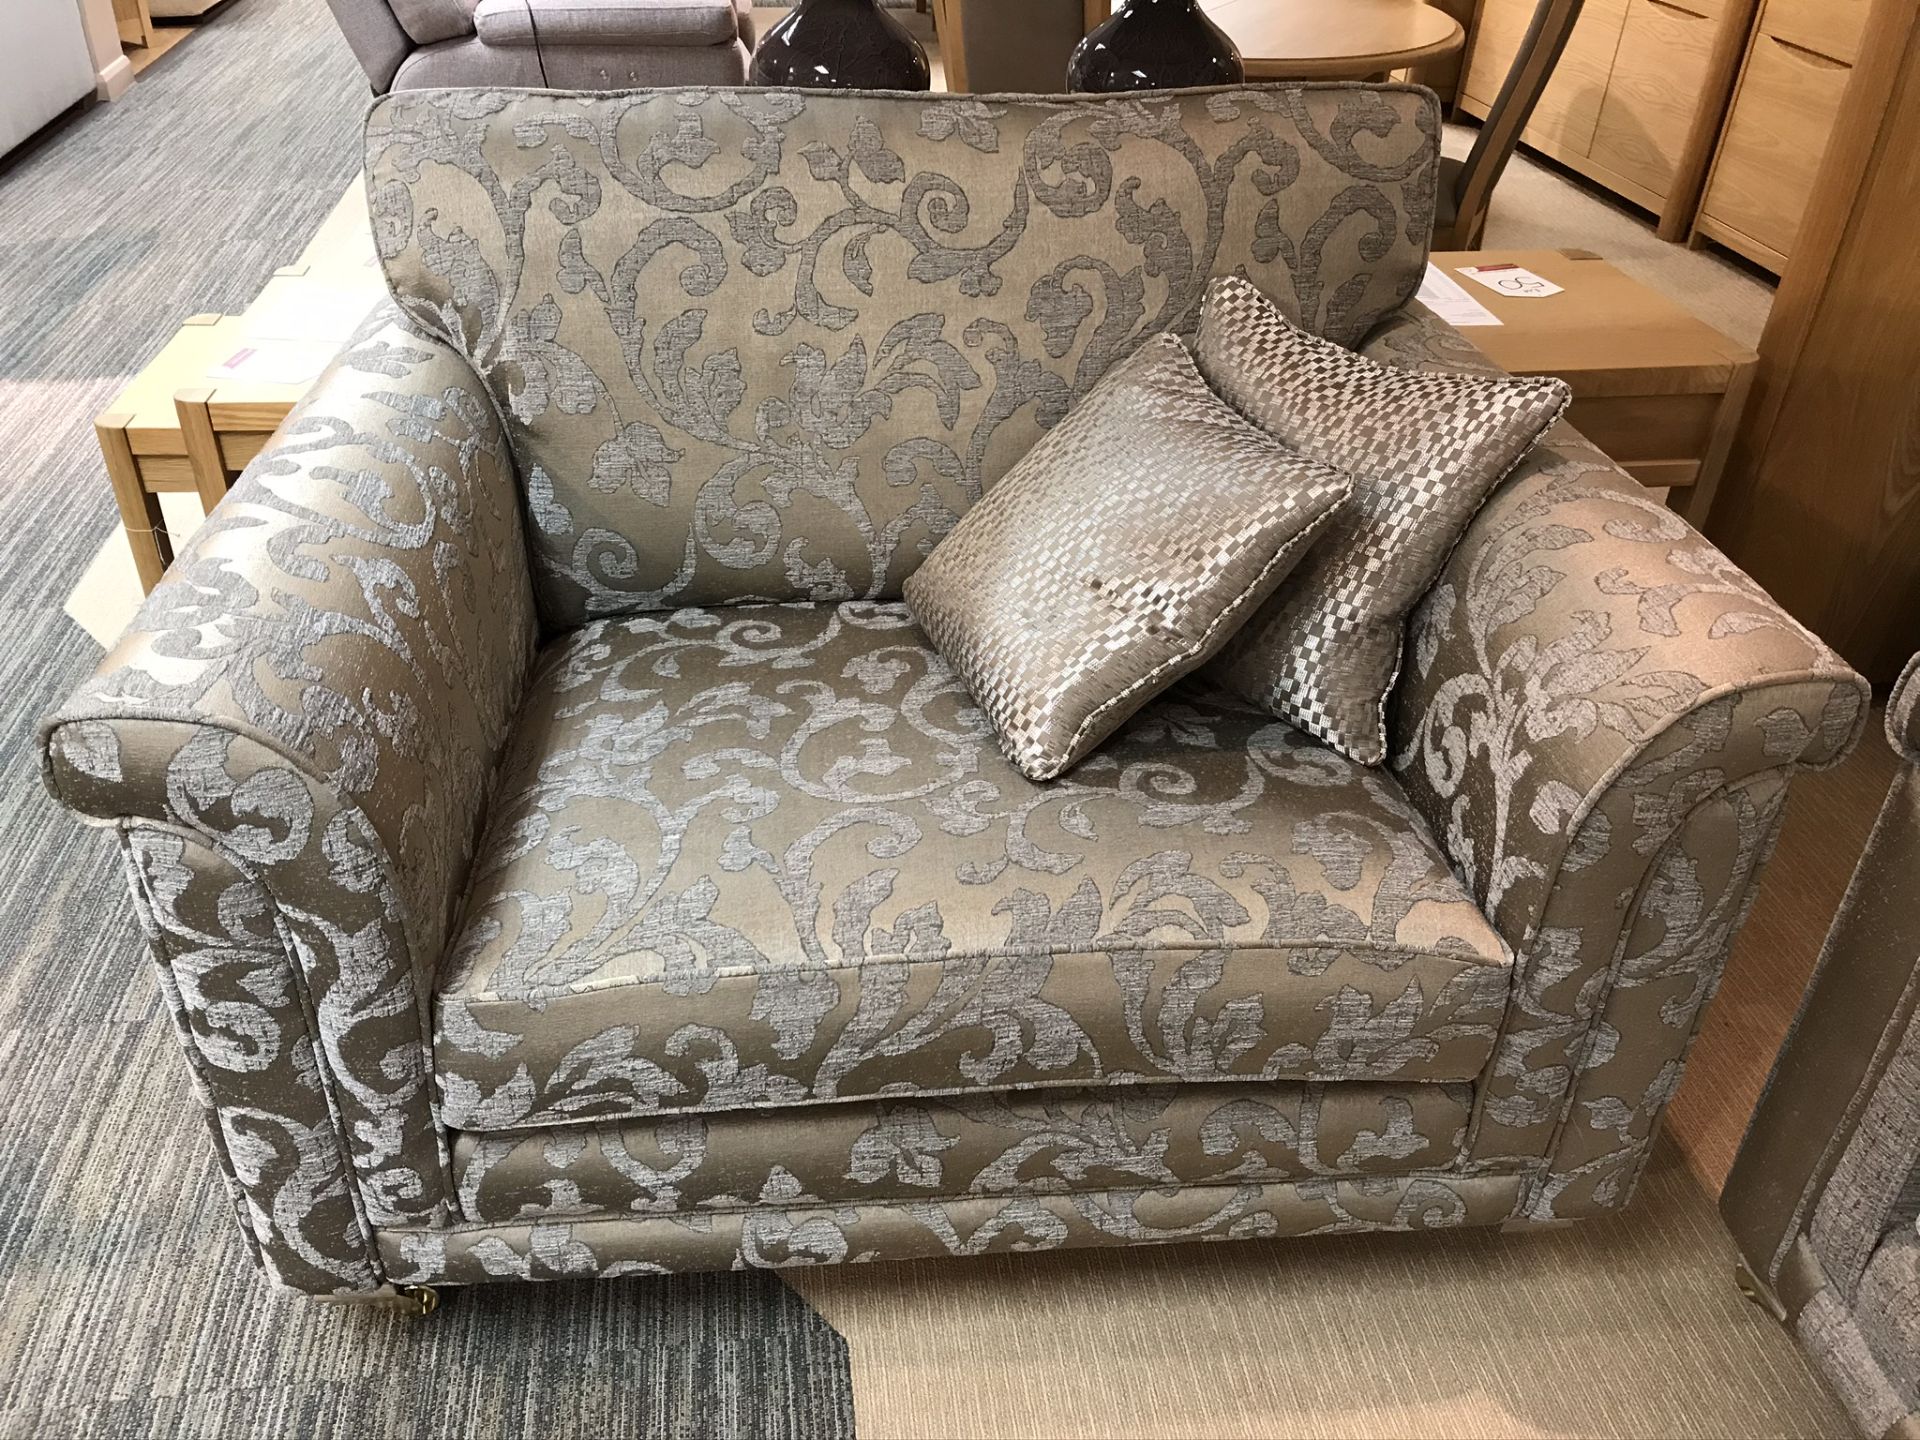 Ex Display Alstons Fleming Sofa, Armchair & Snuggler Chair - Gold Fabric - RRP£4,663 - Image 7 of 7